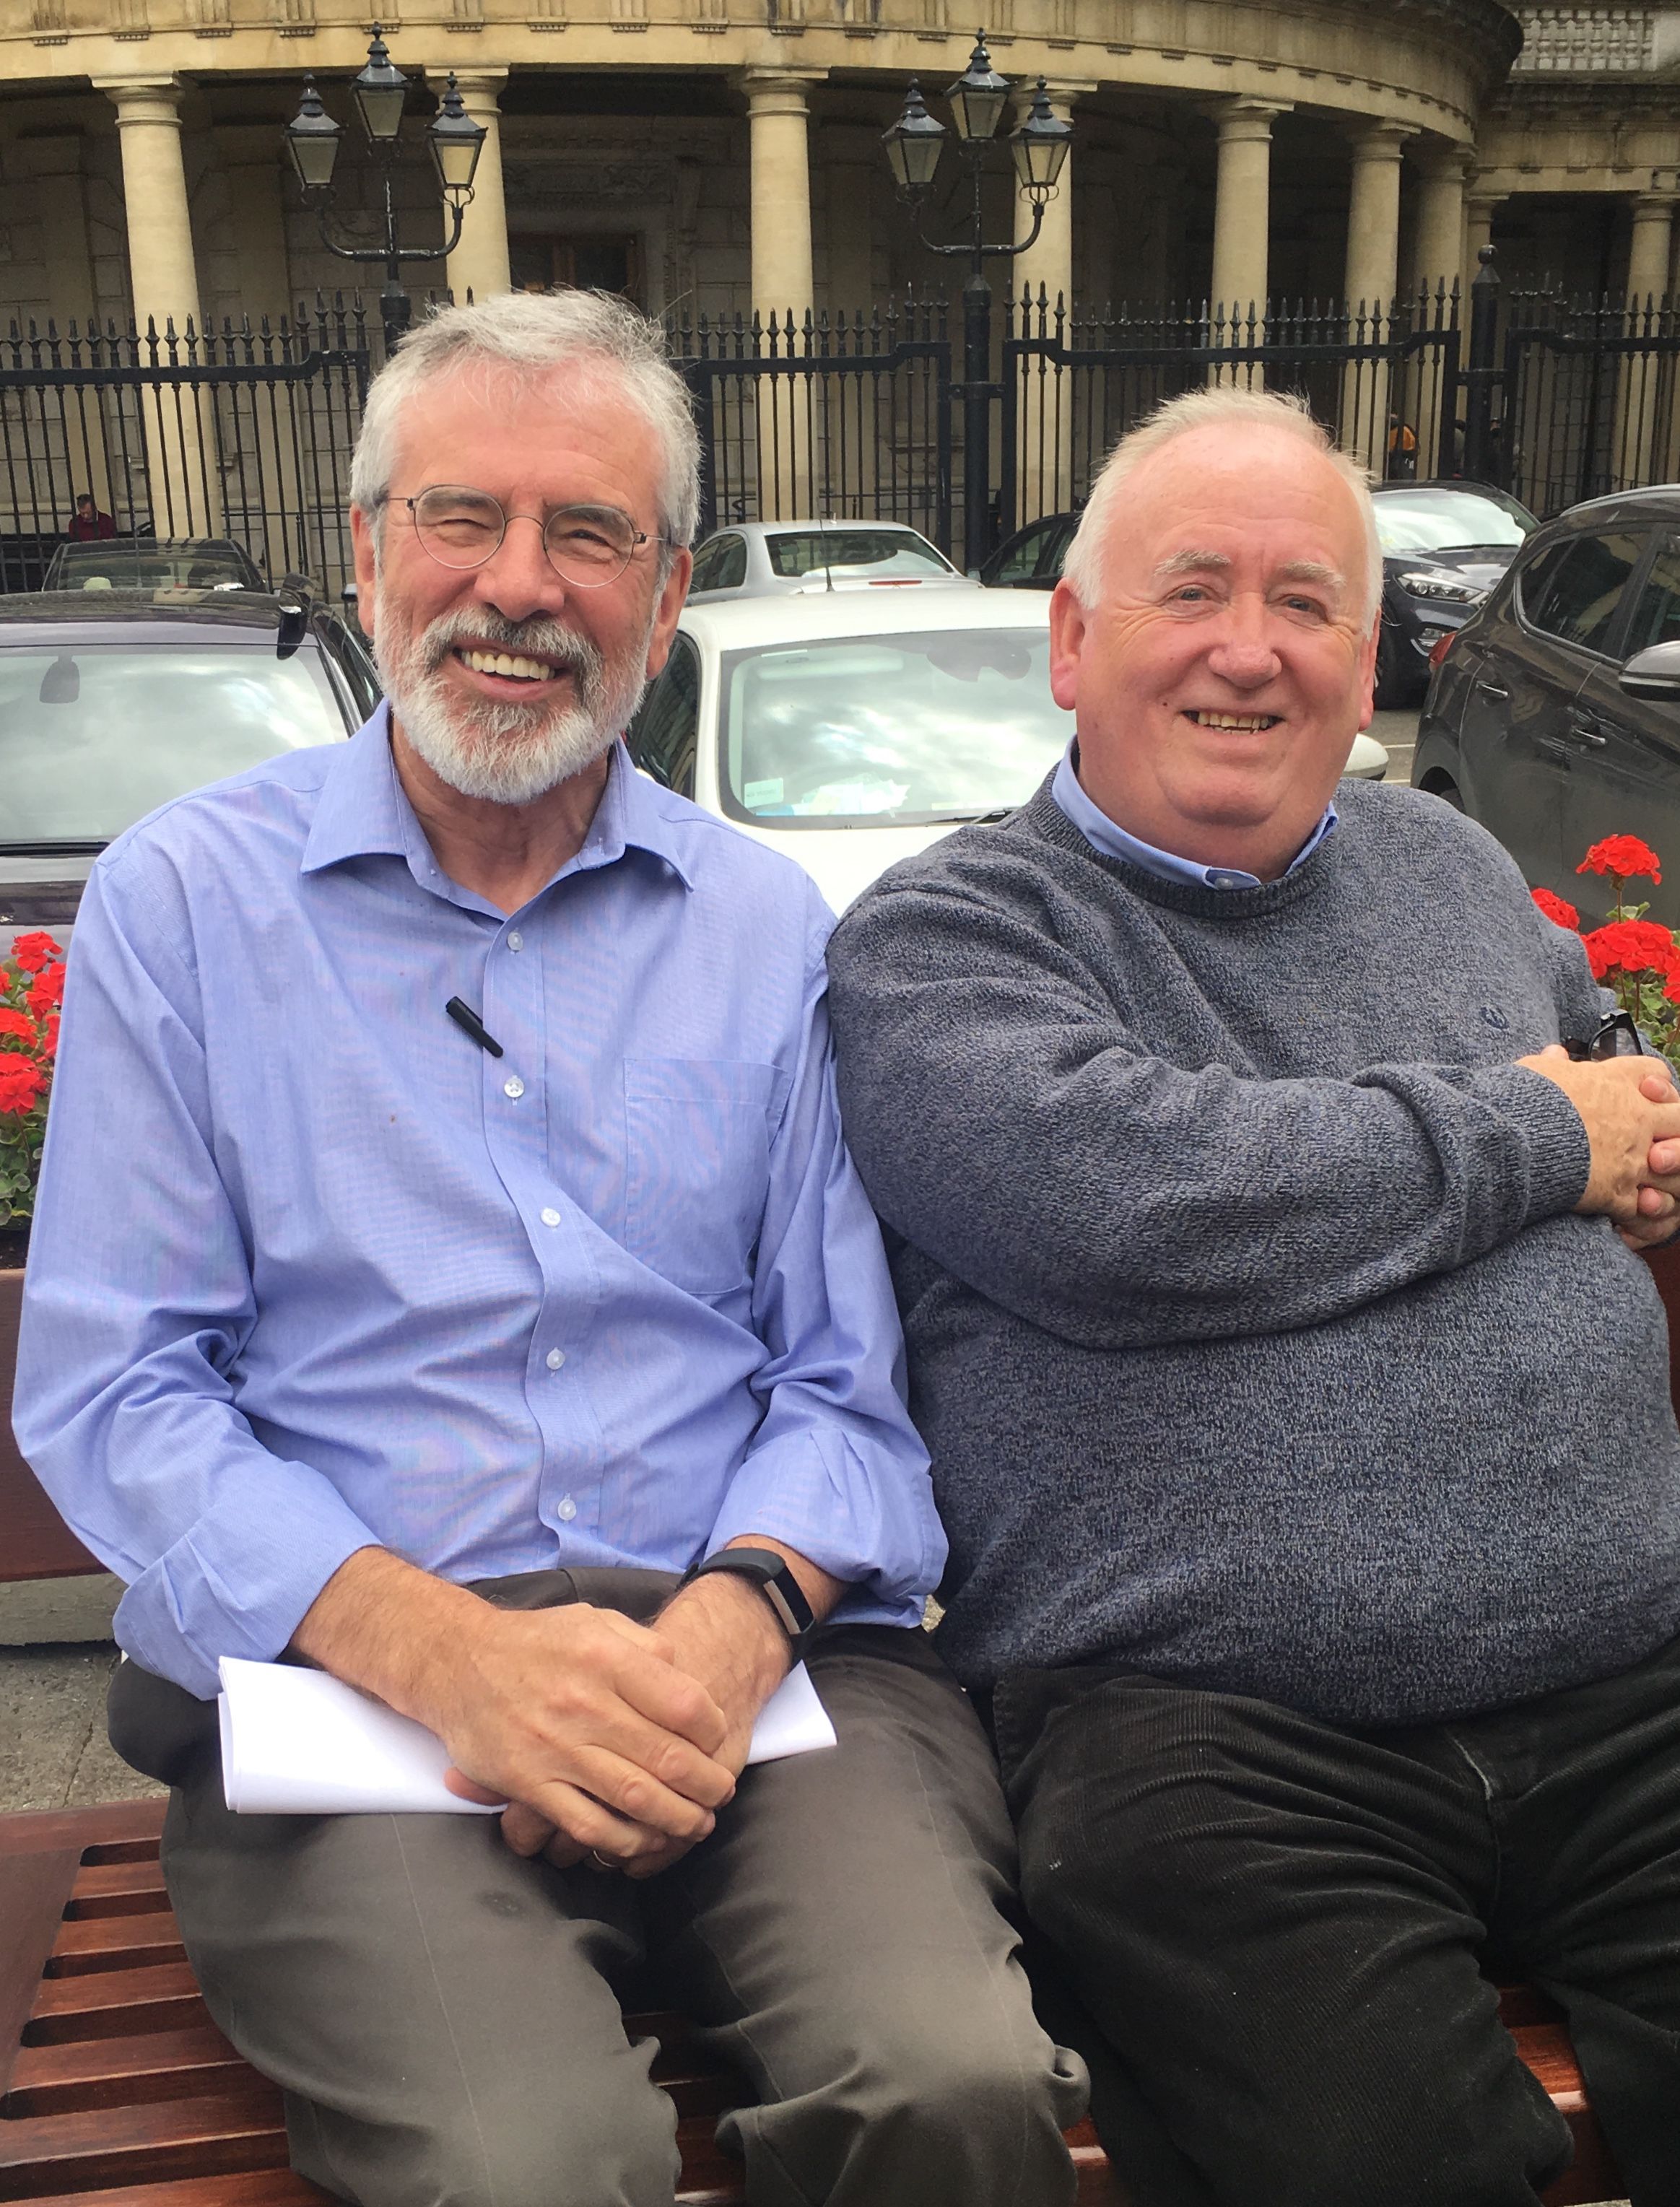 COMRADES: Gerry Adams and Fra McCann at Leinster House